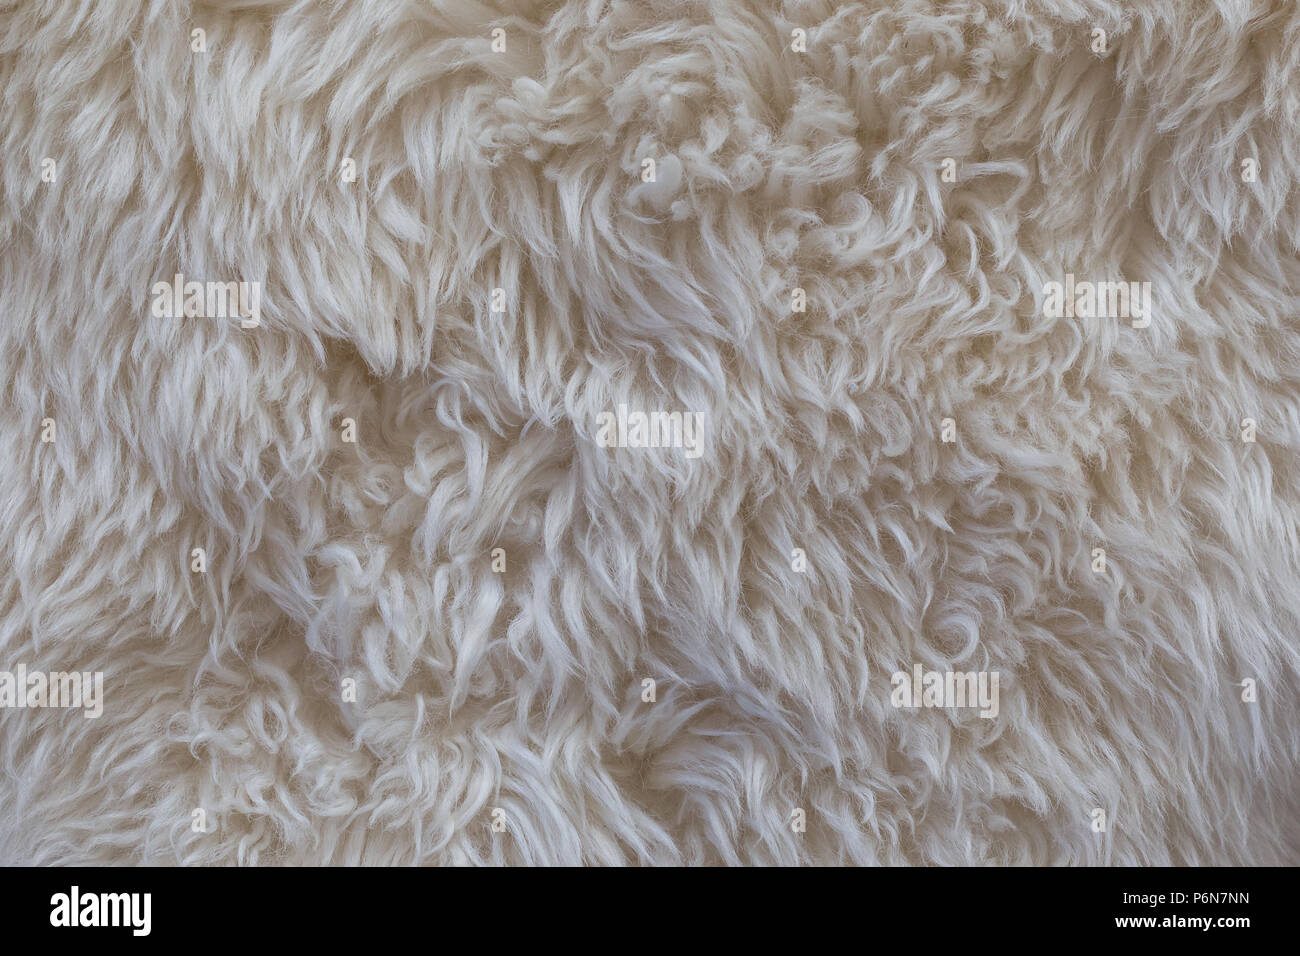 Close-up of a white shaggy carpet texture background viewed from above Stock Photo